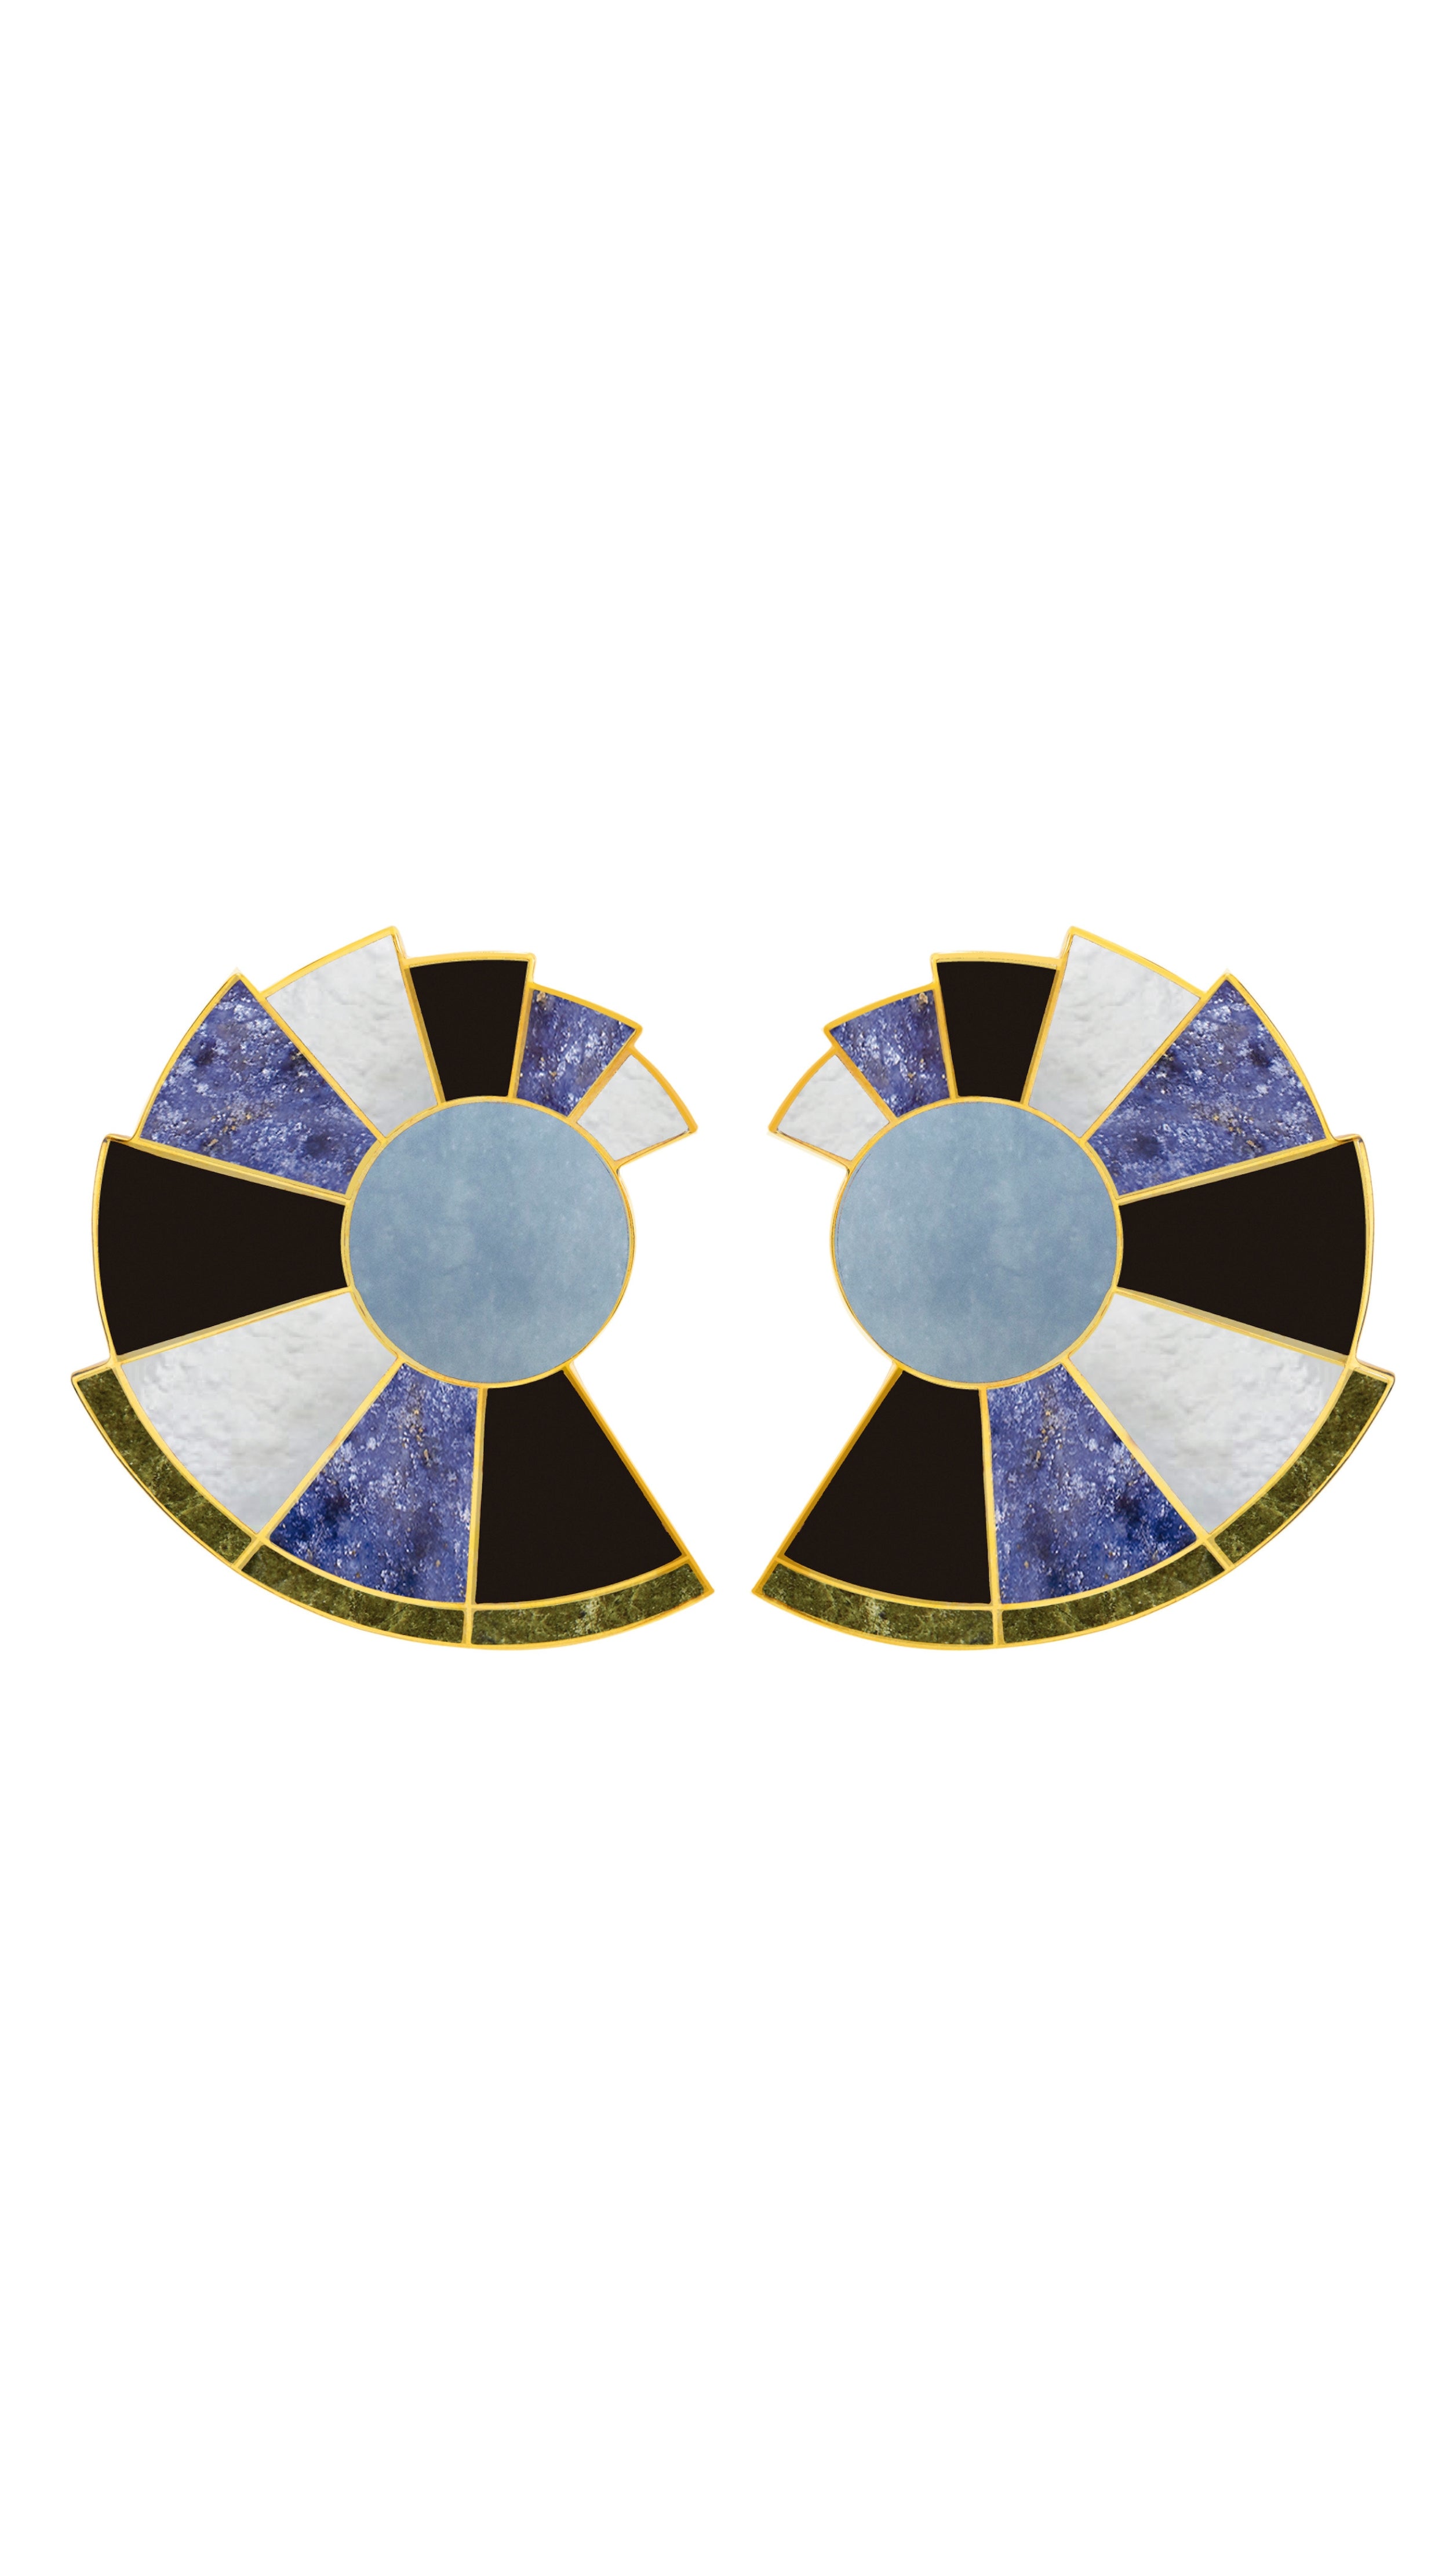 Monica Sordo Earfan Spiral Earrings in patchwork nautilus. In shades of blue, black, grey and green. Photo shows earrings from the front.